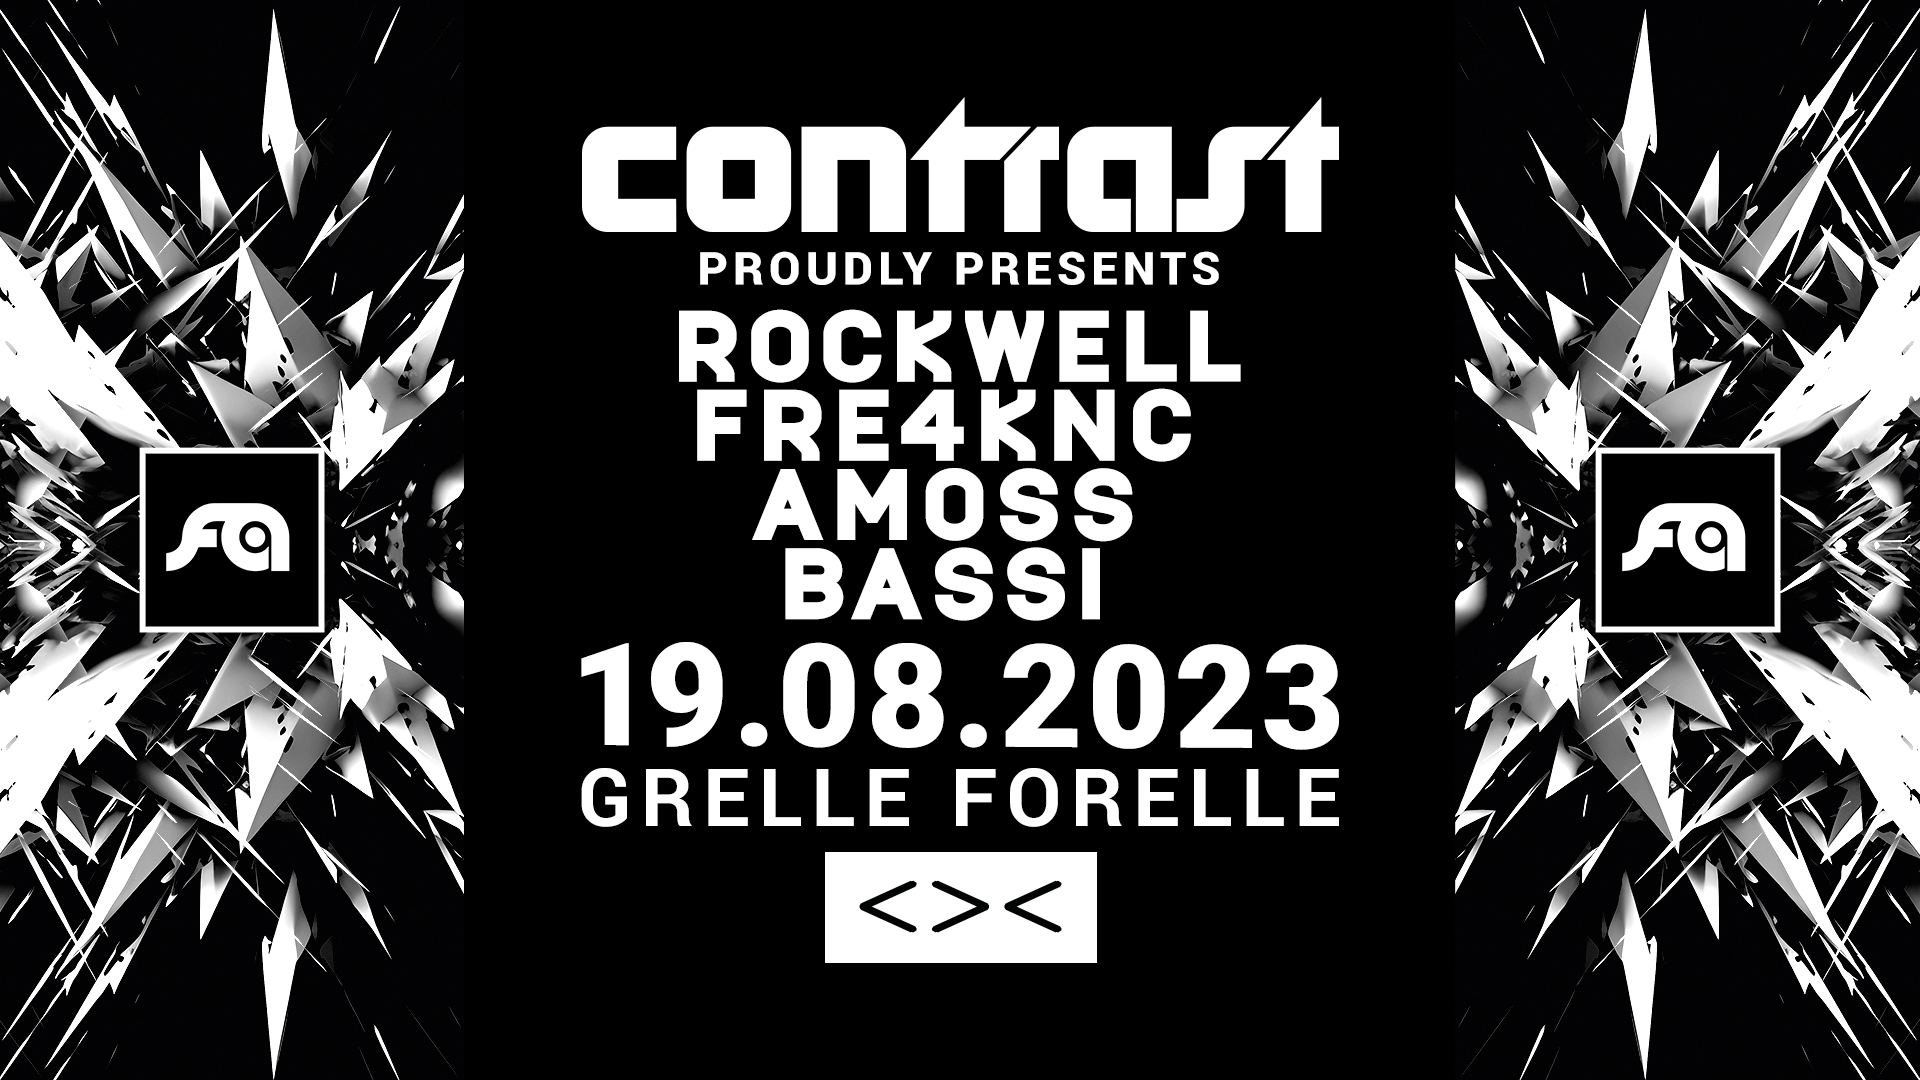 CONTRAST x FLEXOUT w/ ROCKWELL + FRE4KNC + AMOSS + BASSI | 18+ am 19. August 2023 @ Grelle Forelle.